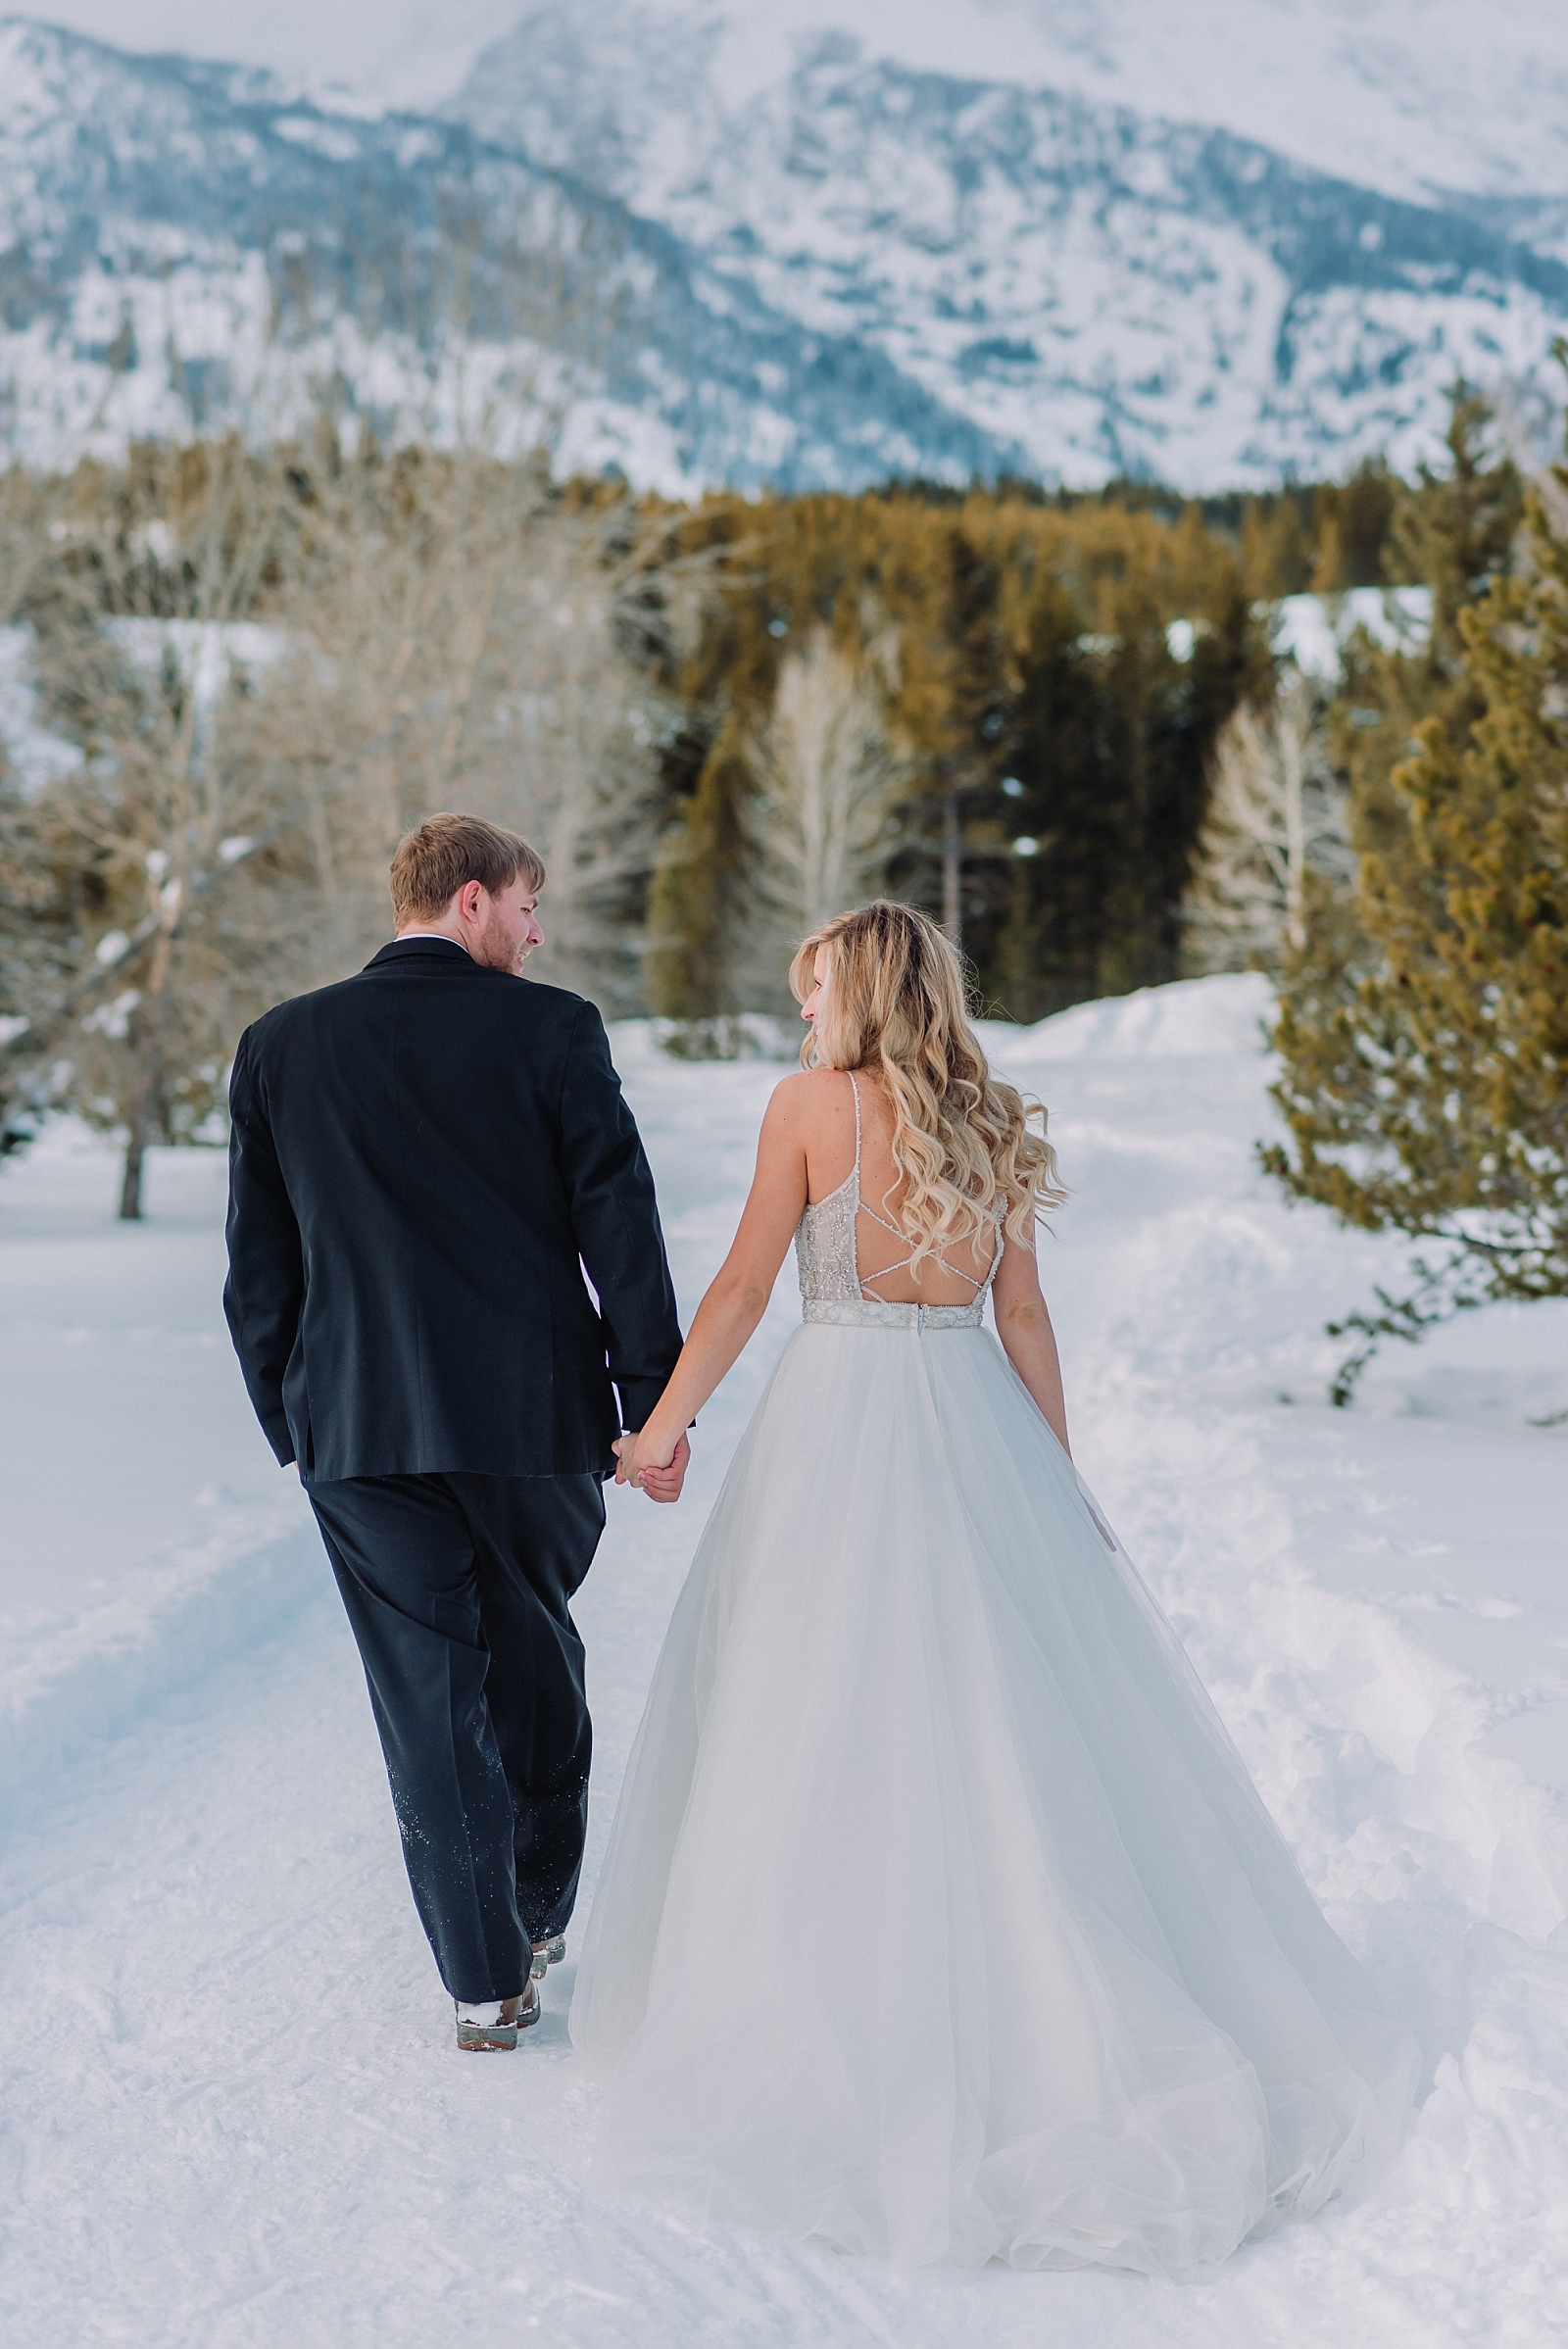 bride-and-groom-walking-hand-in-hand-jackson-hole-elopement-wedding-photographer-winter-in-the-mountains